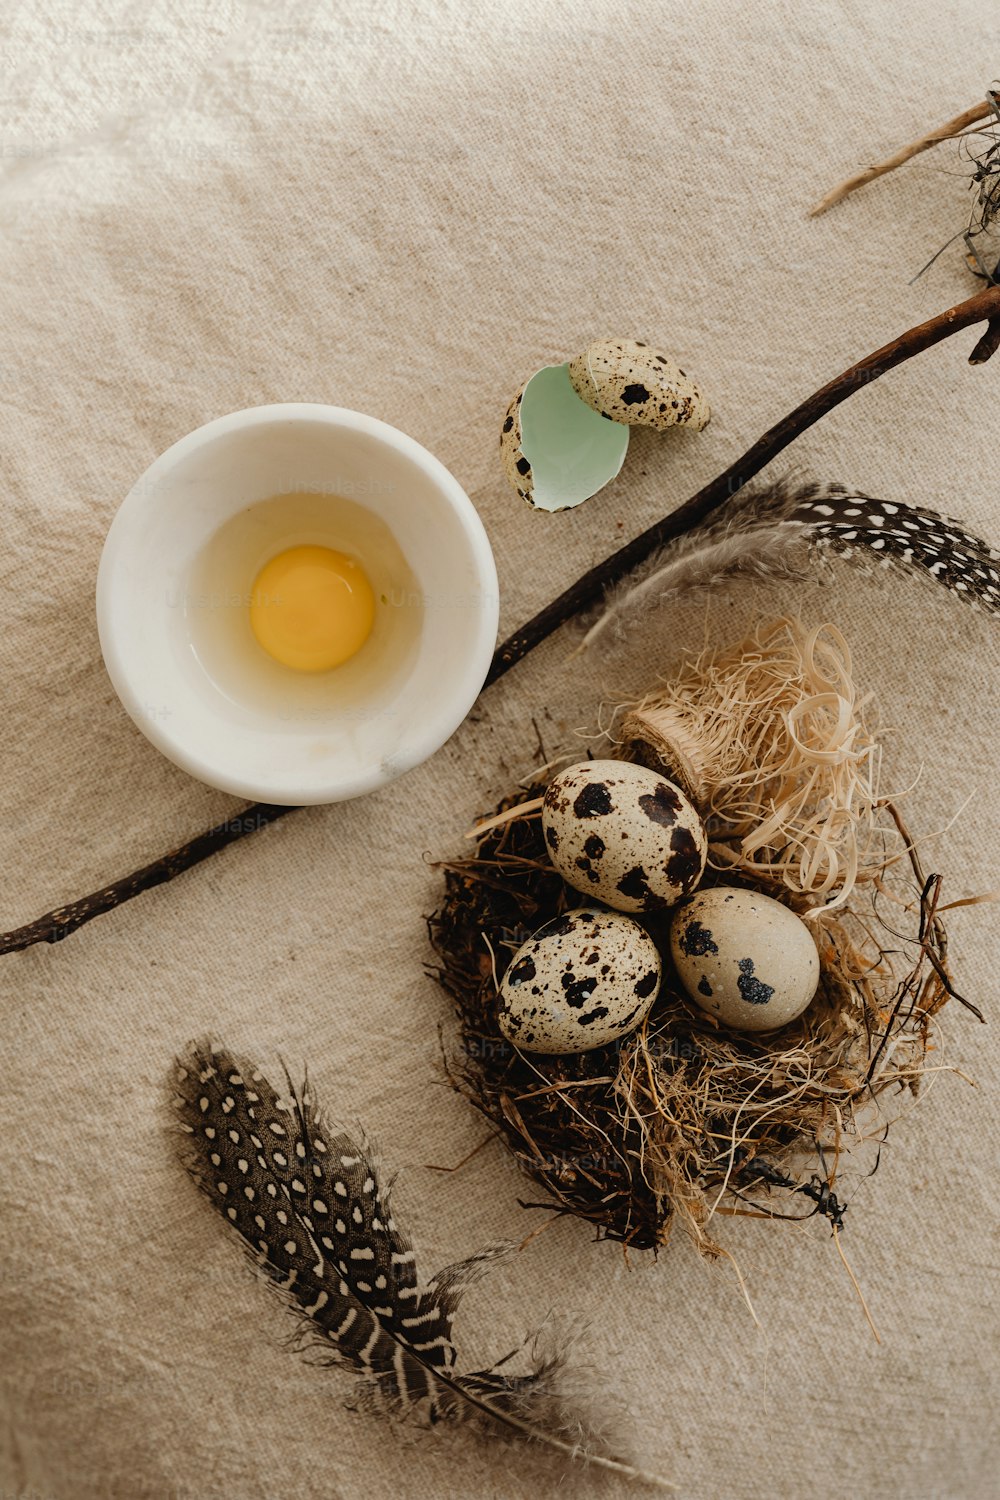 a bowl of eggs and some feathers on a table